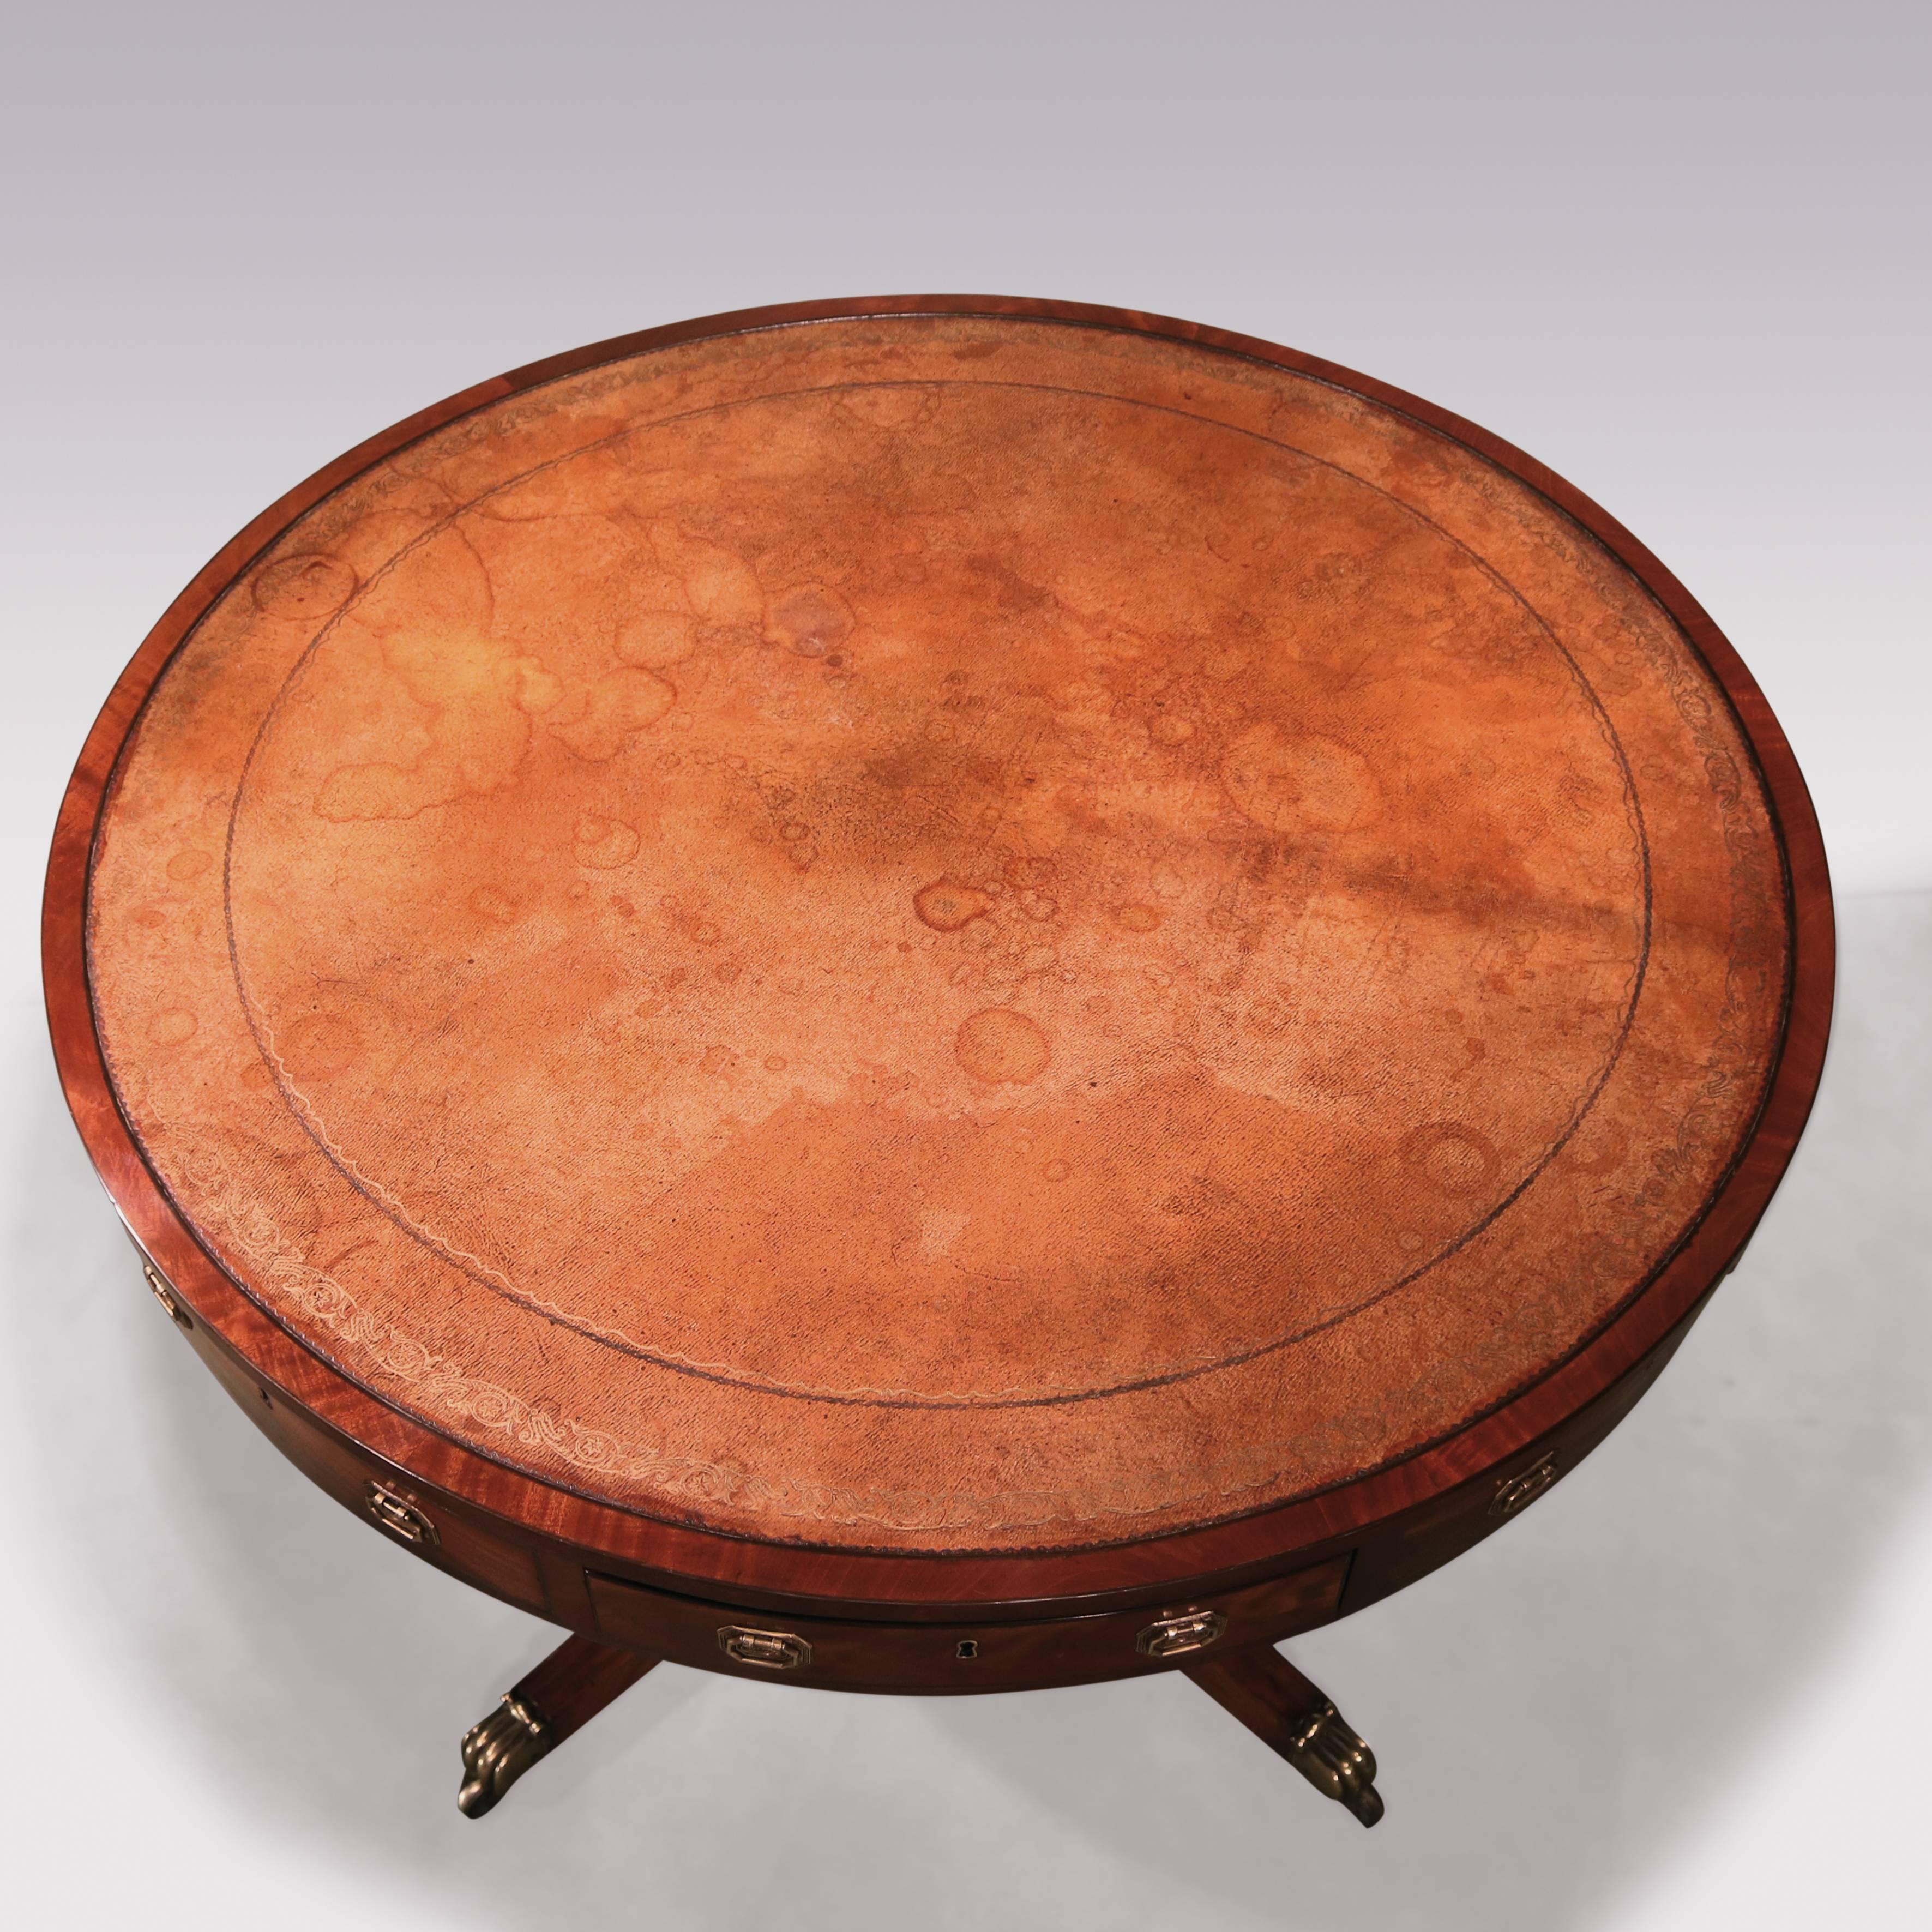 A George III period mahogany revolving drum table, ebony strung throughout, having four real and four dummy flame-figured drawers, raised on baluster turned stem, supported on moulded four -spaly legs, ending on original brass lion's paw castors.